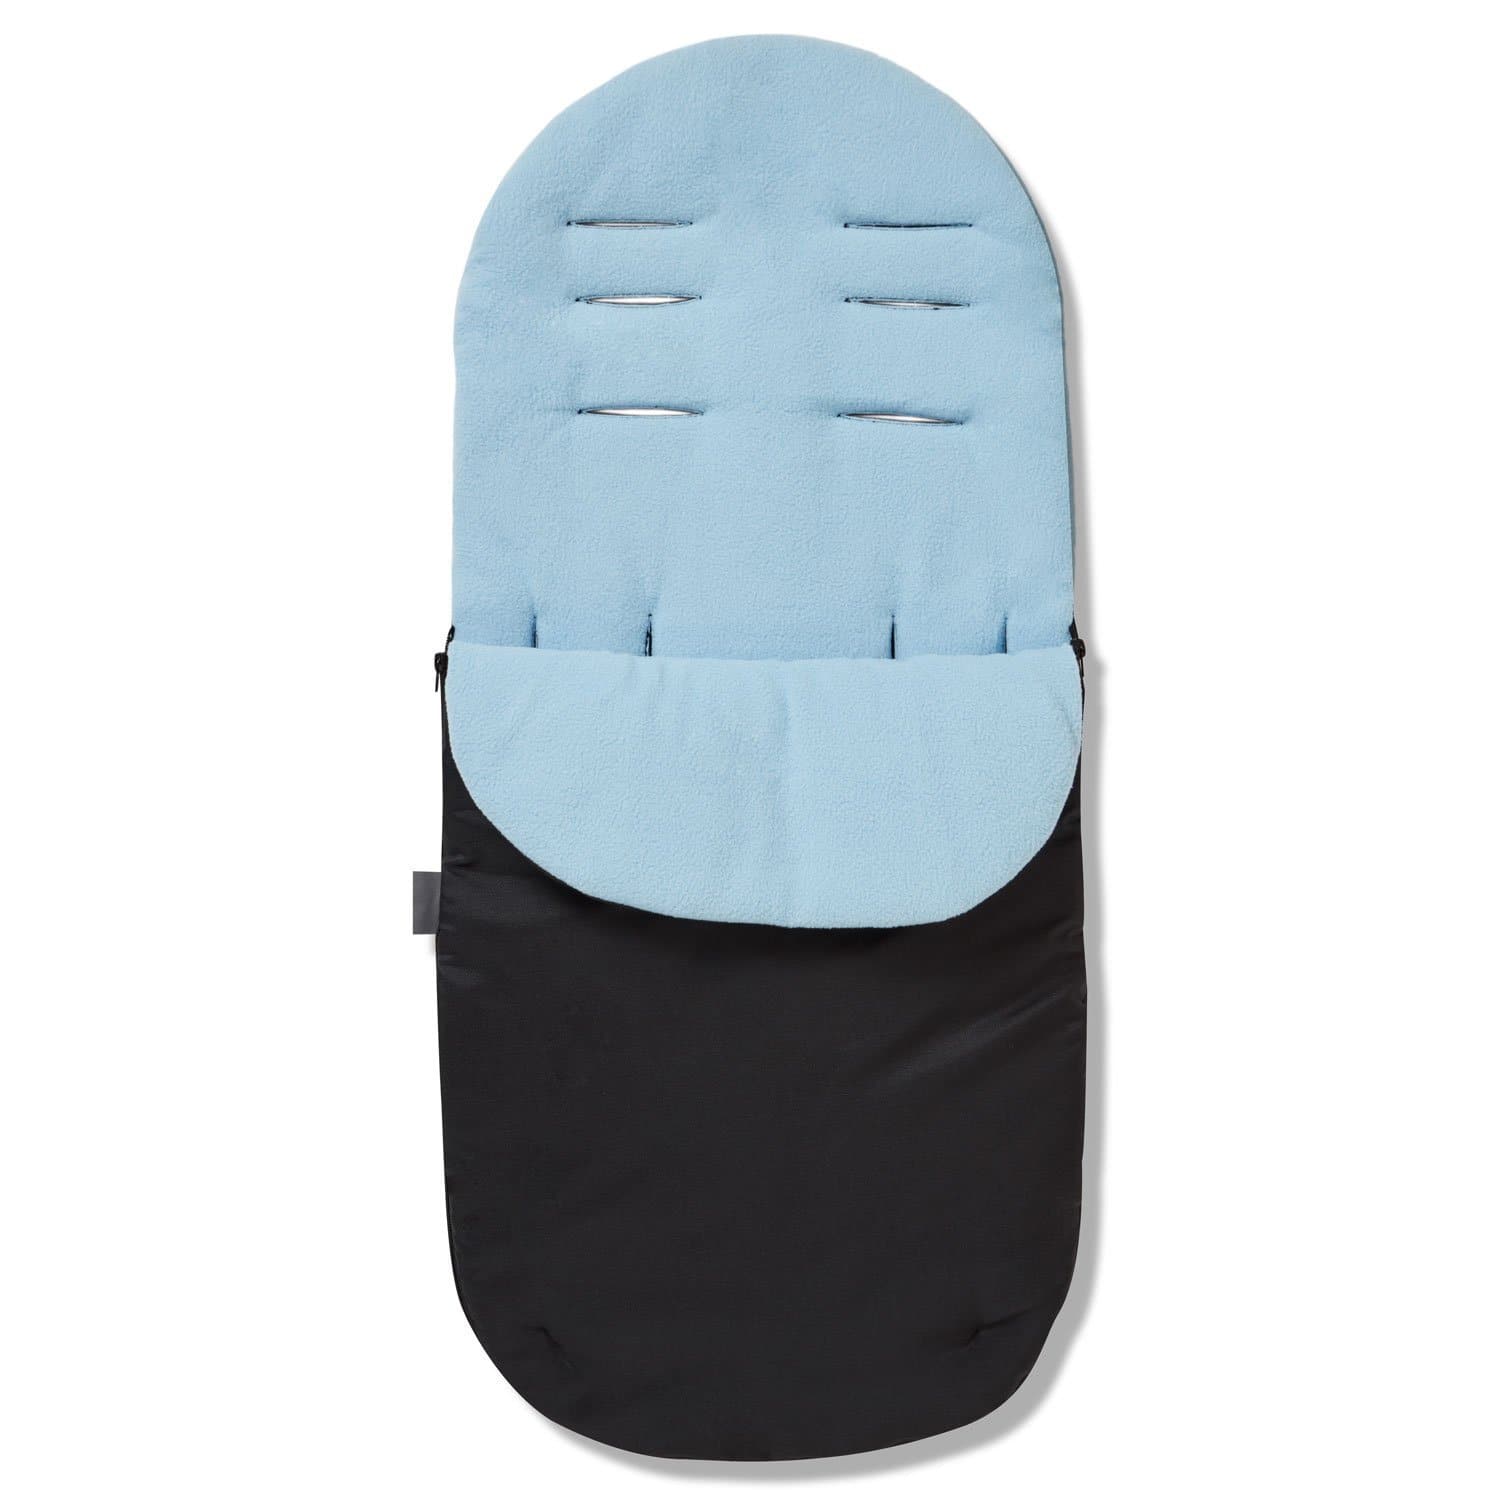 Footmuff / Cosy Toes Compatible with iCandy - Light Blue / Fits All Models | For Your Little One